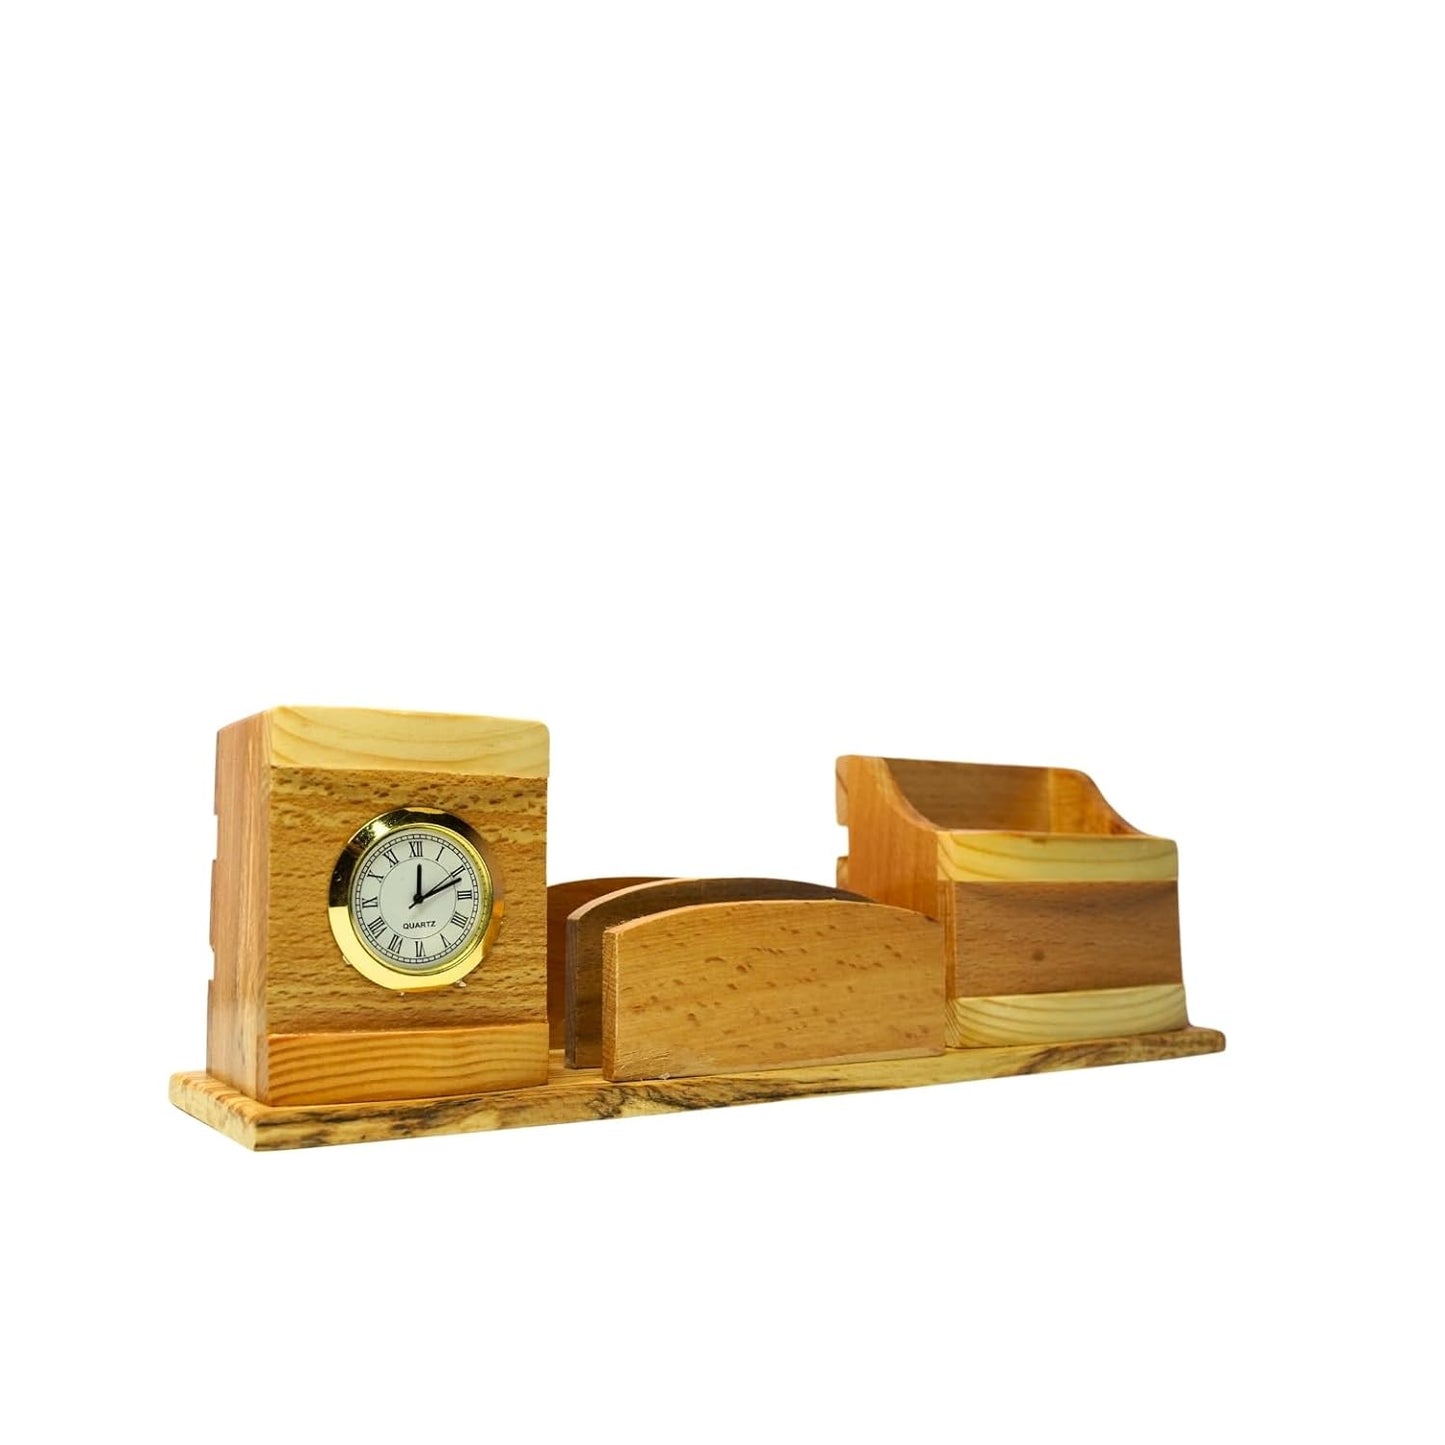 Craft Closet & Gifts - Steam Beech Wood Pencil/Pen Stand Holder with Mobile and Card Holder + Clock - Design 1 - Personalized Office Accessory for IAS, Advocate, Office & Corporate Gifts